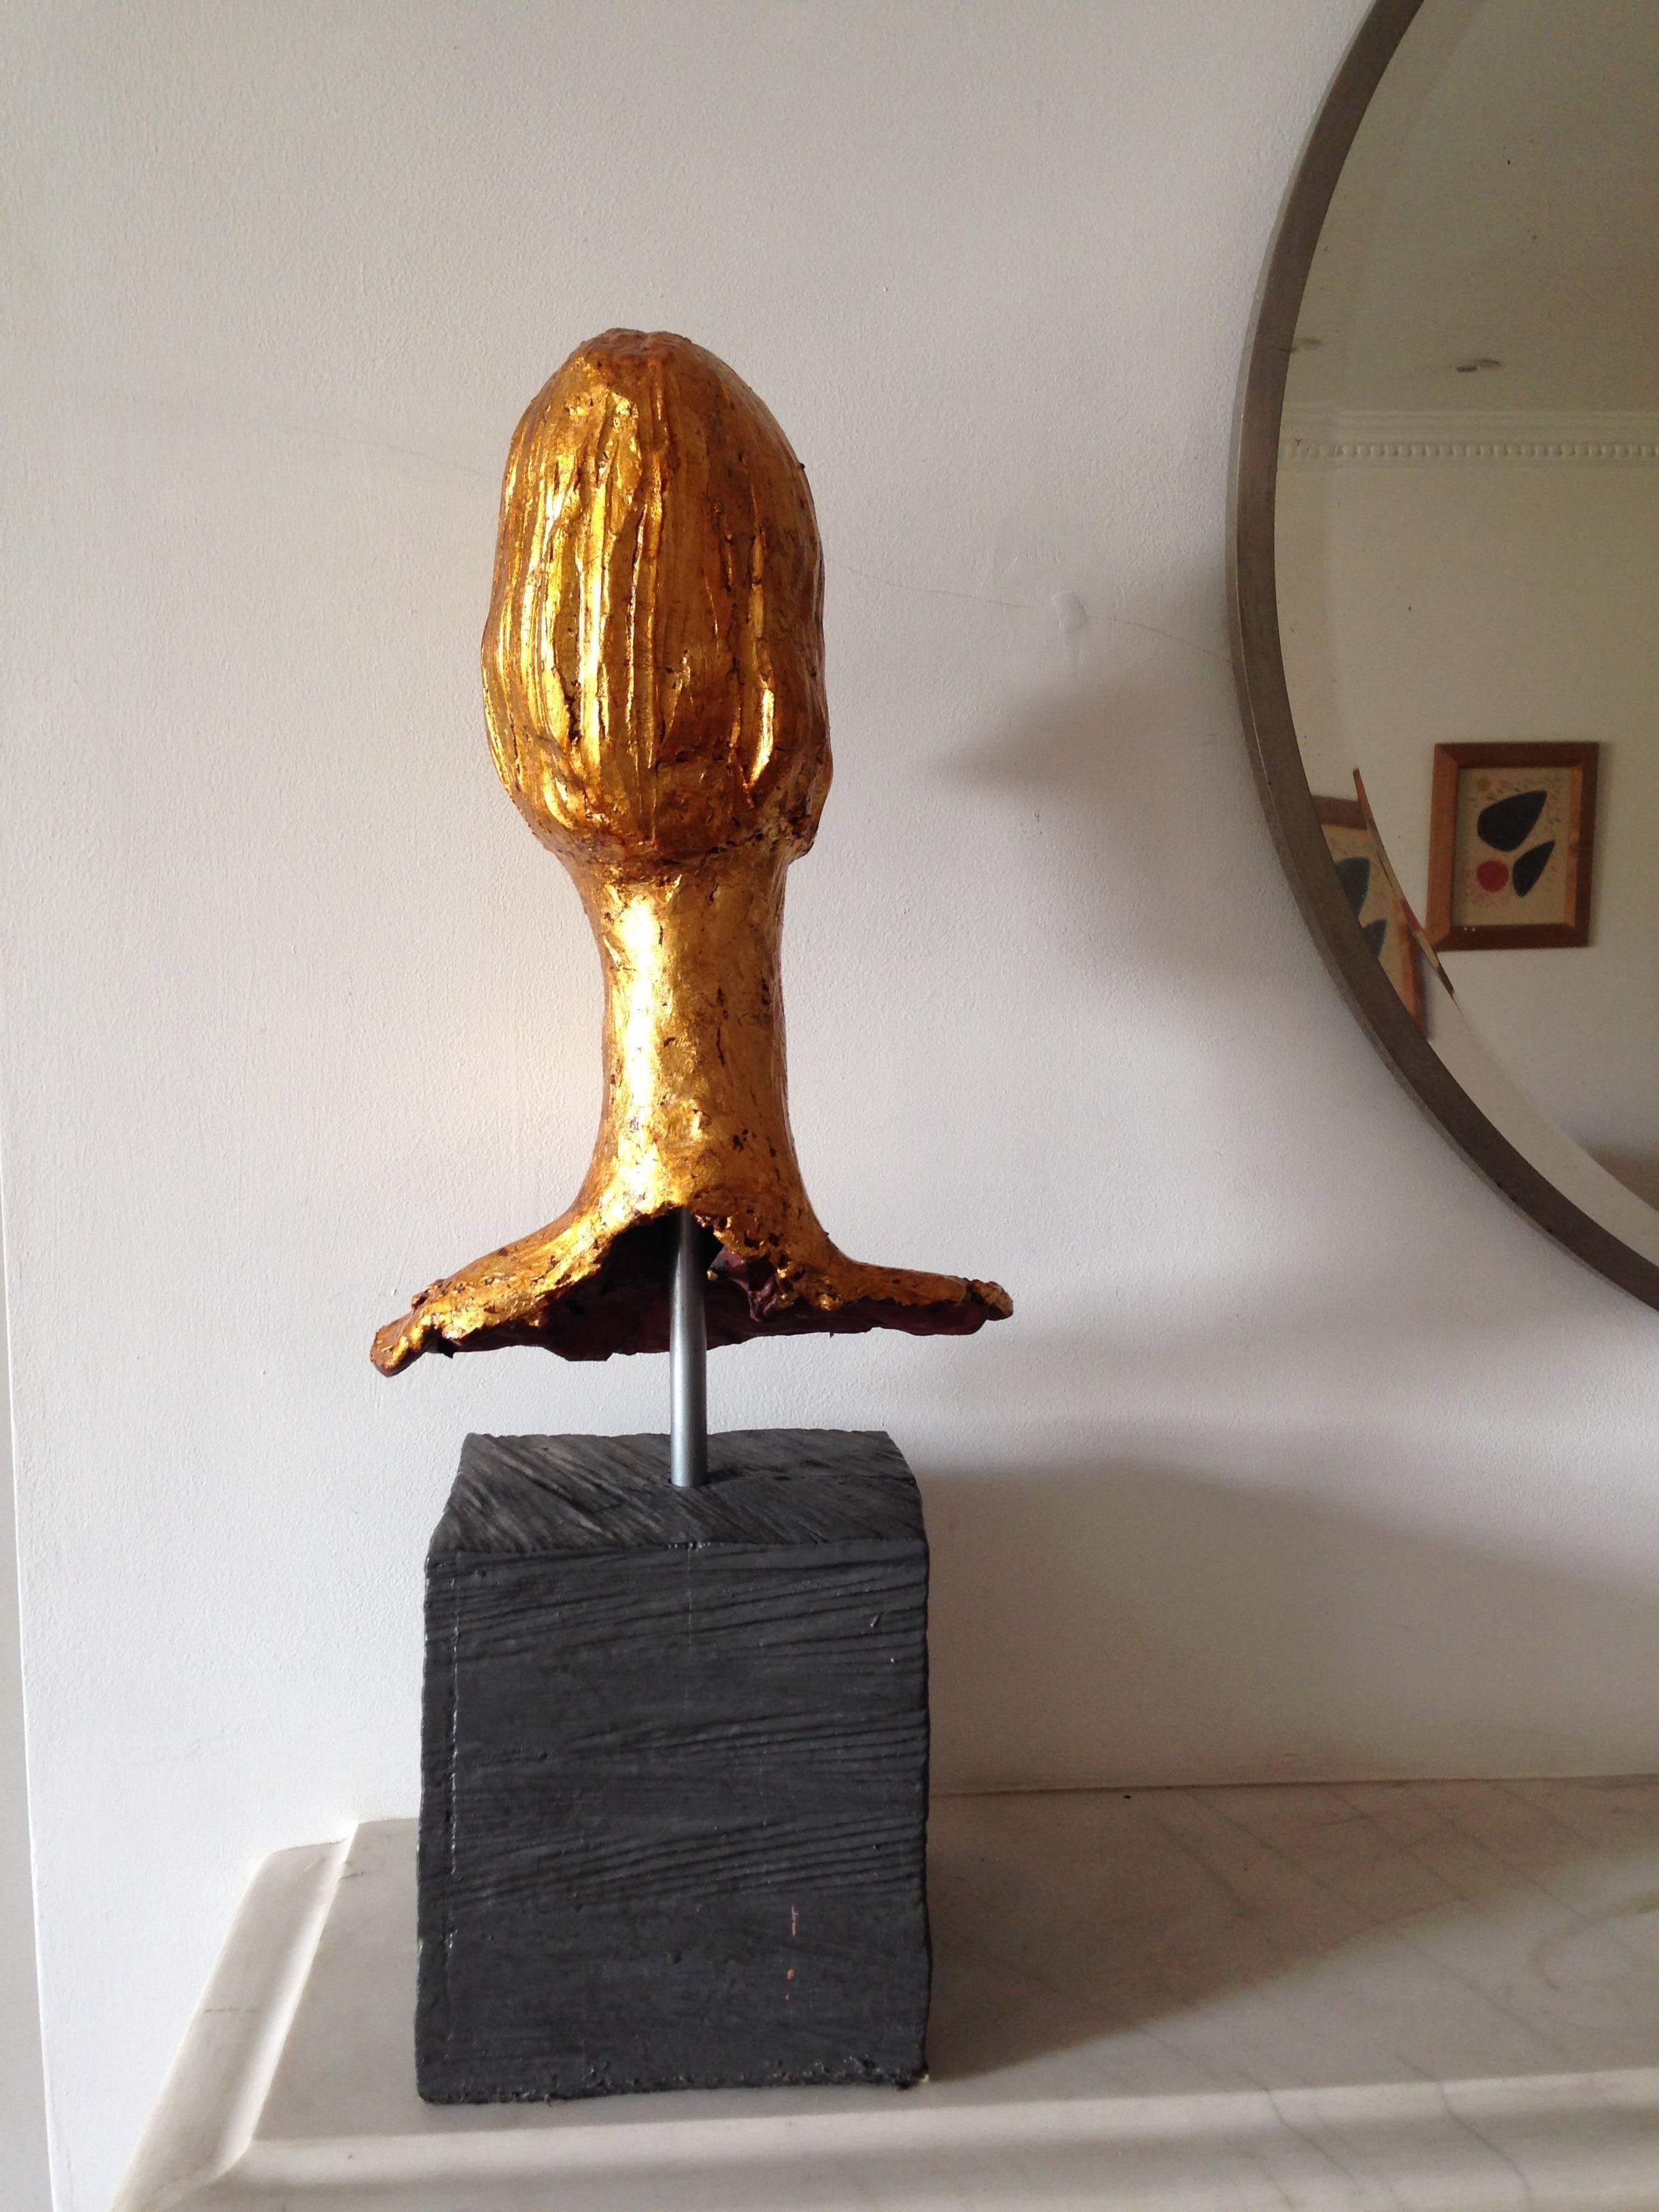 English Contemporary Sculpture gilded ceramic Edith Sitwell Sculpture by Simon Toone